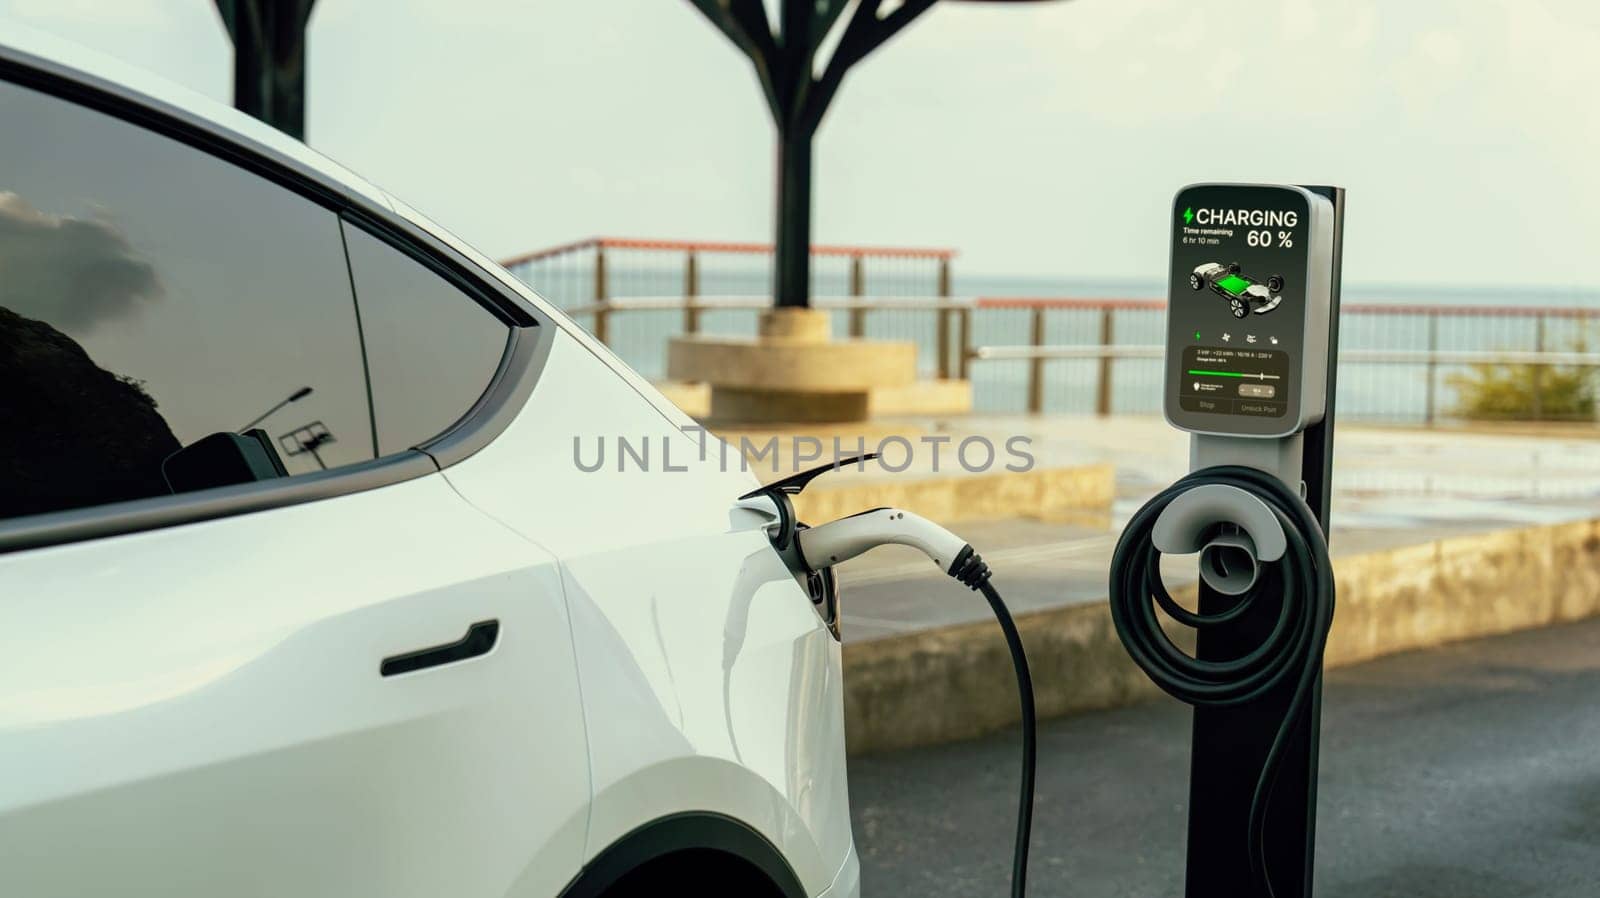 Electric car recharging battery at outdoor EV charging station. Perpetual by biancoblue